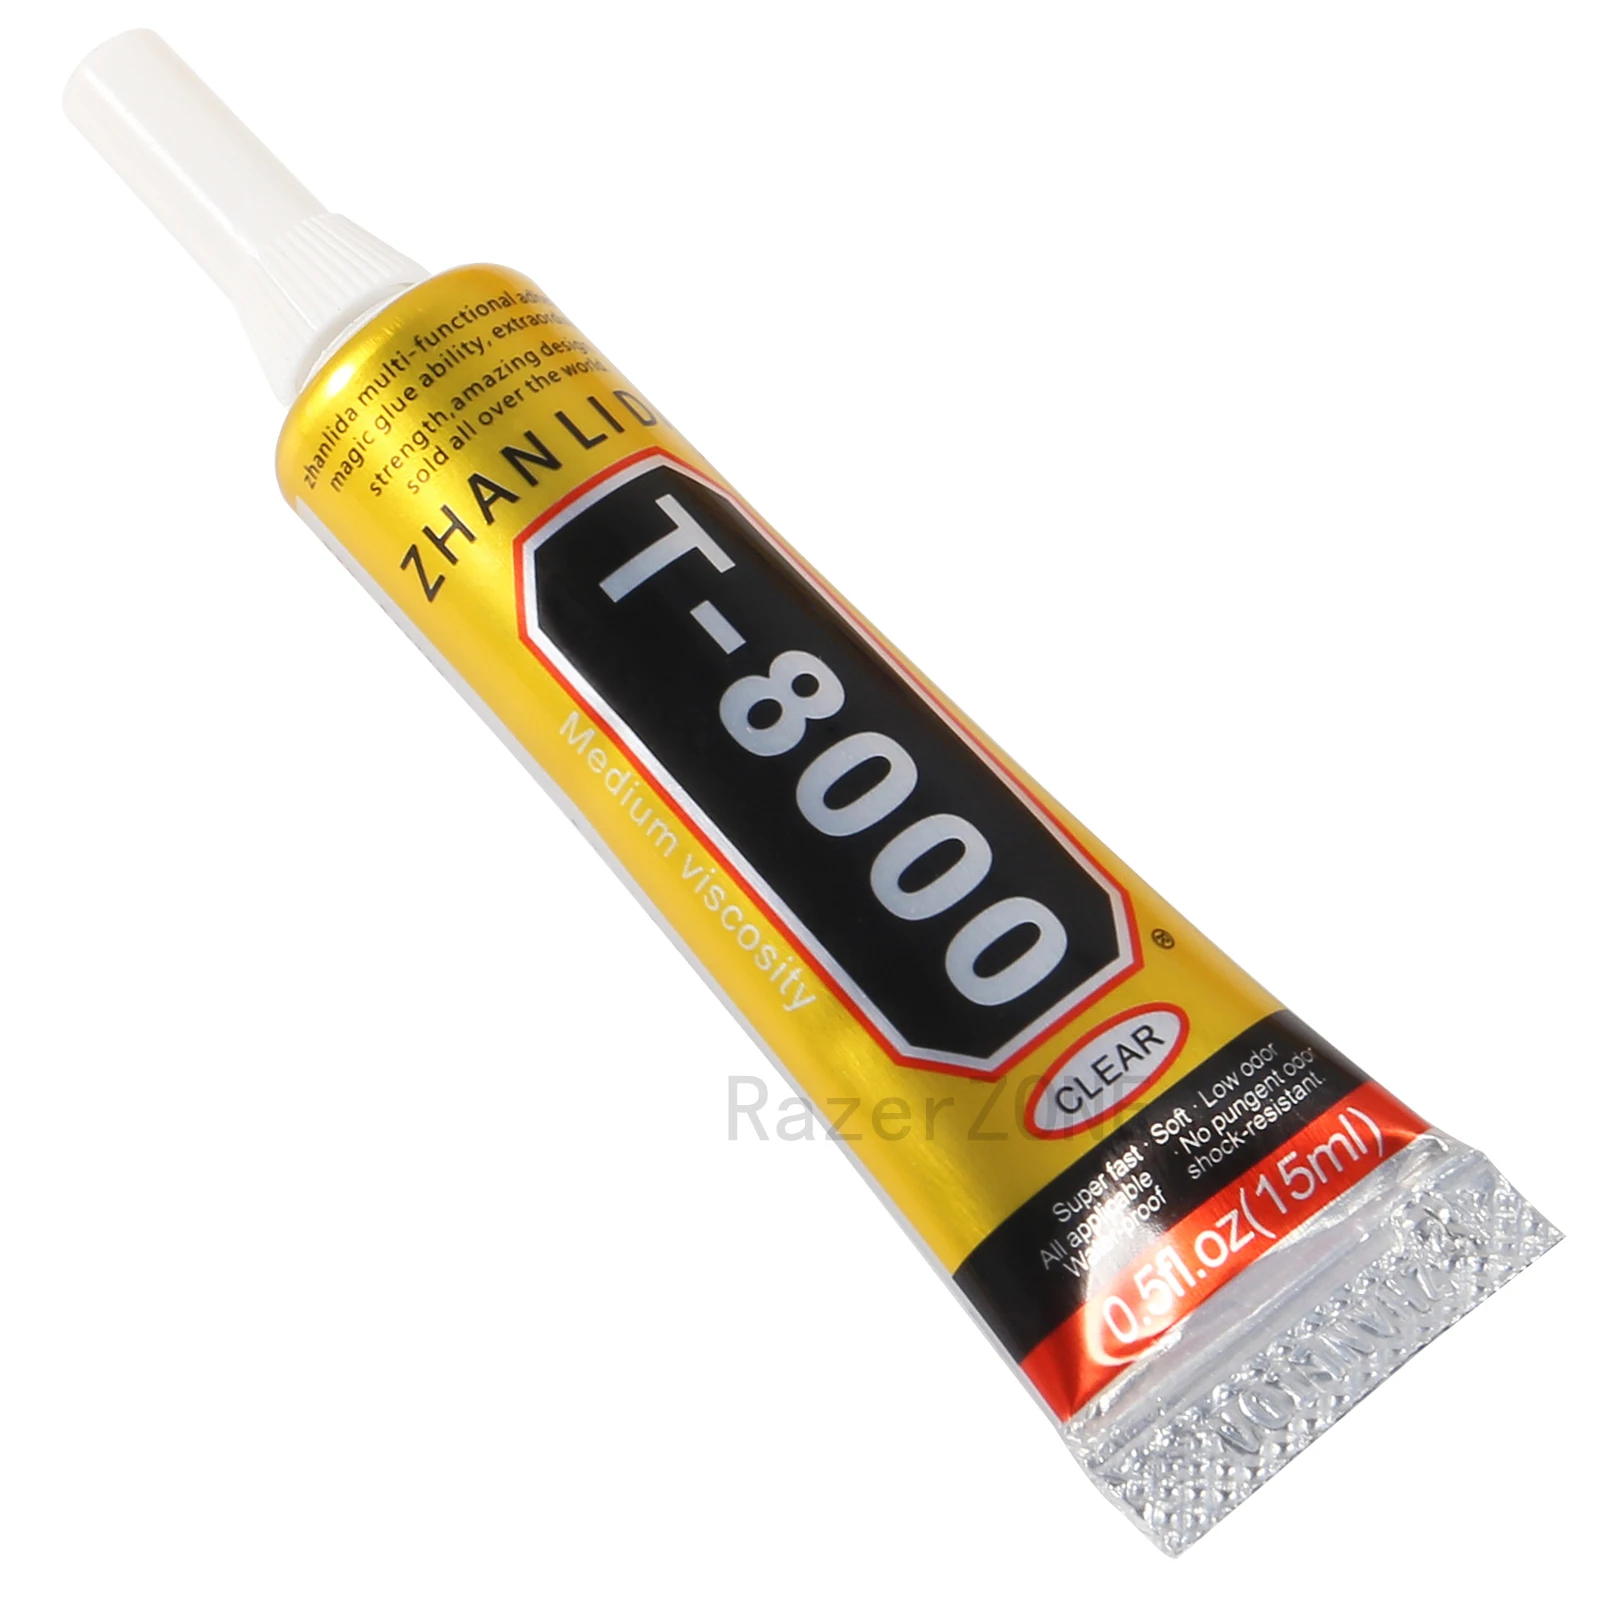 15/50/110ml T-8000 Strong Epoxy Resin Adhesive T8000 Glue Superglue Sealant Handset Touch Screen Frame Repair DIY Glue